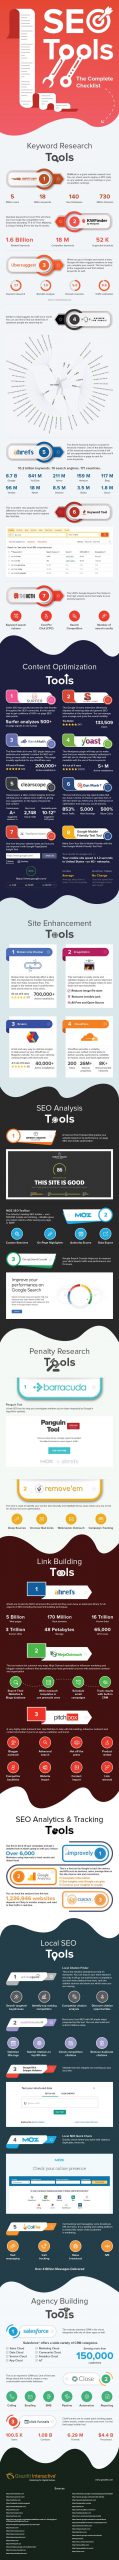 a checklist of great seo tools for 2020 infographic scaled 1